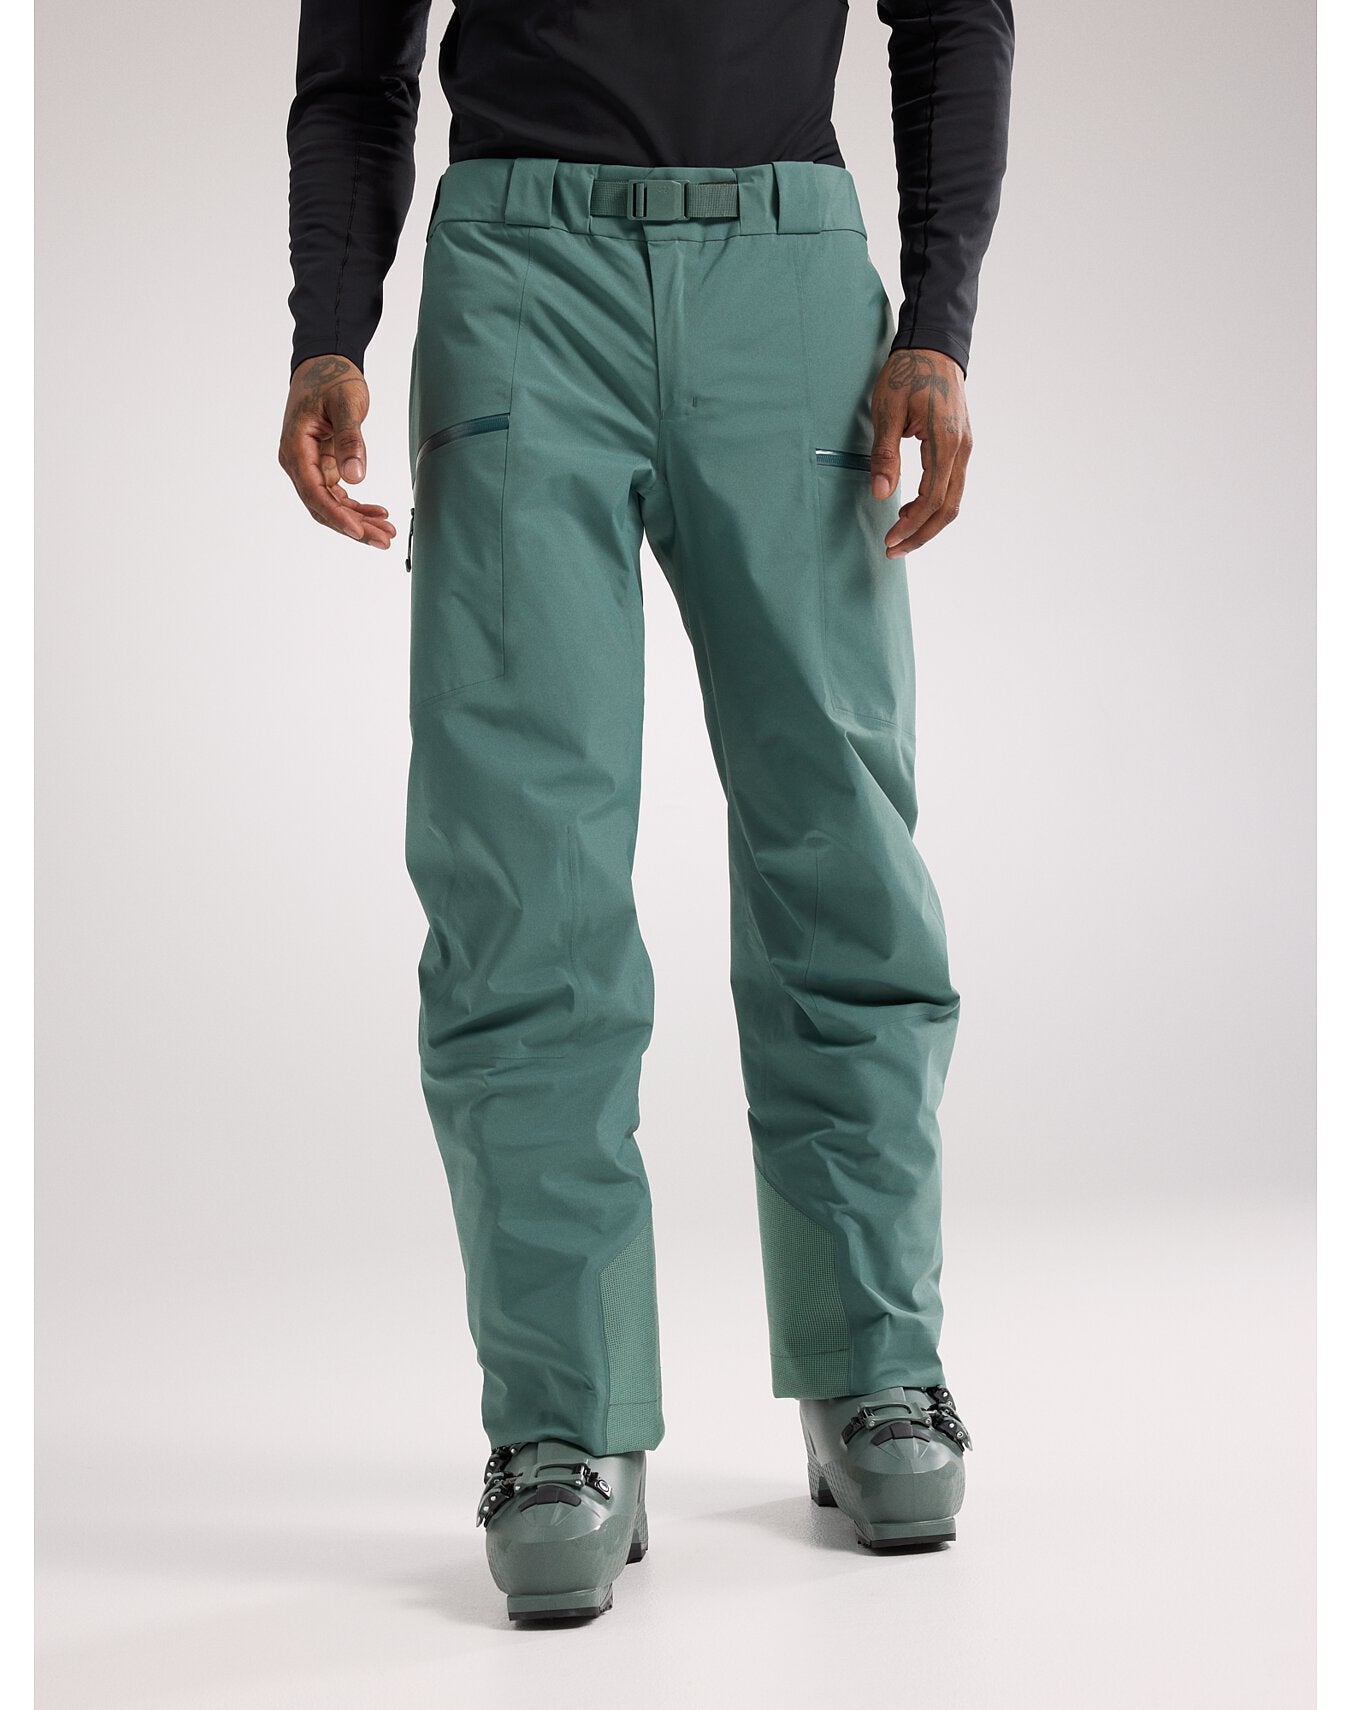 F23-X000007145-Sabre-Insulated-Pant-Boxcar-Front-View.jpg